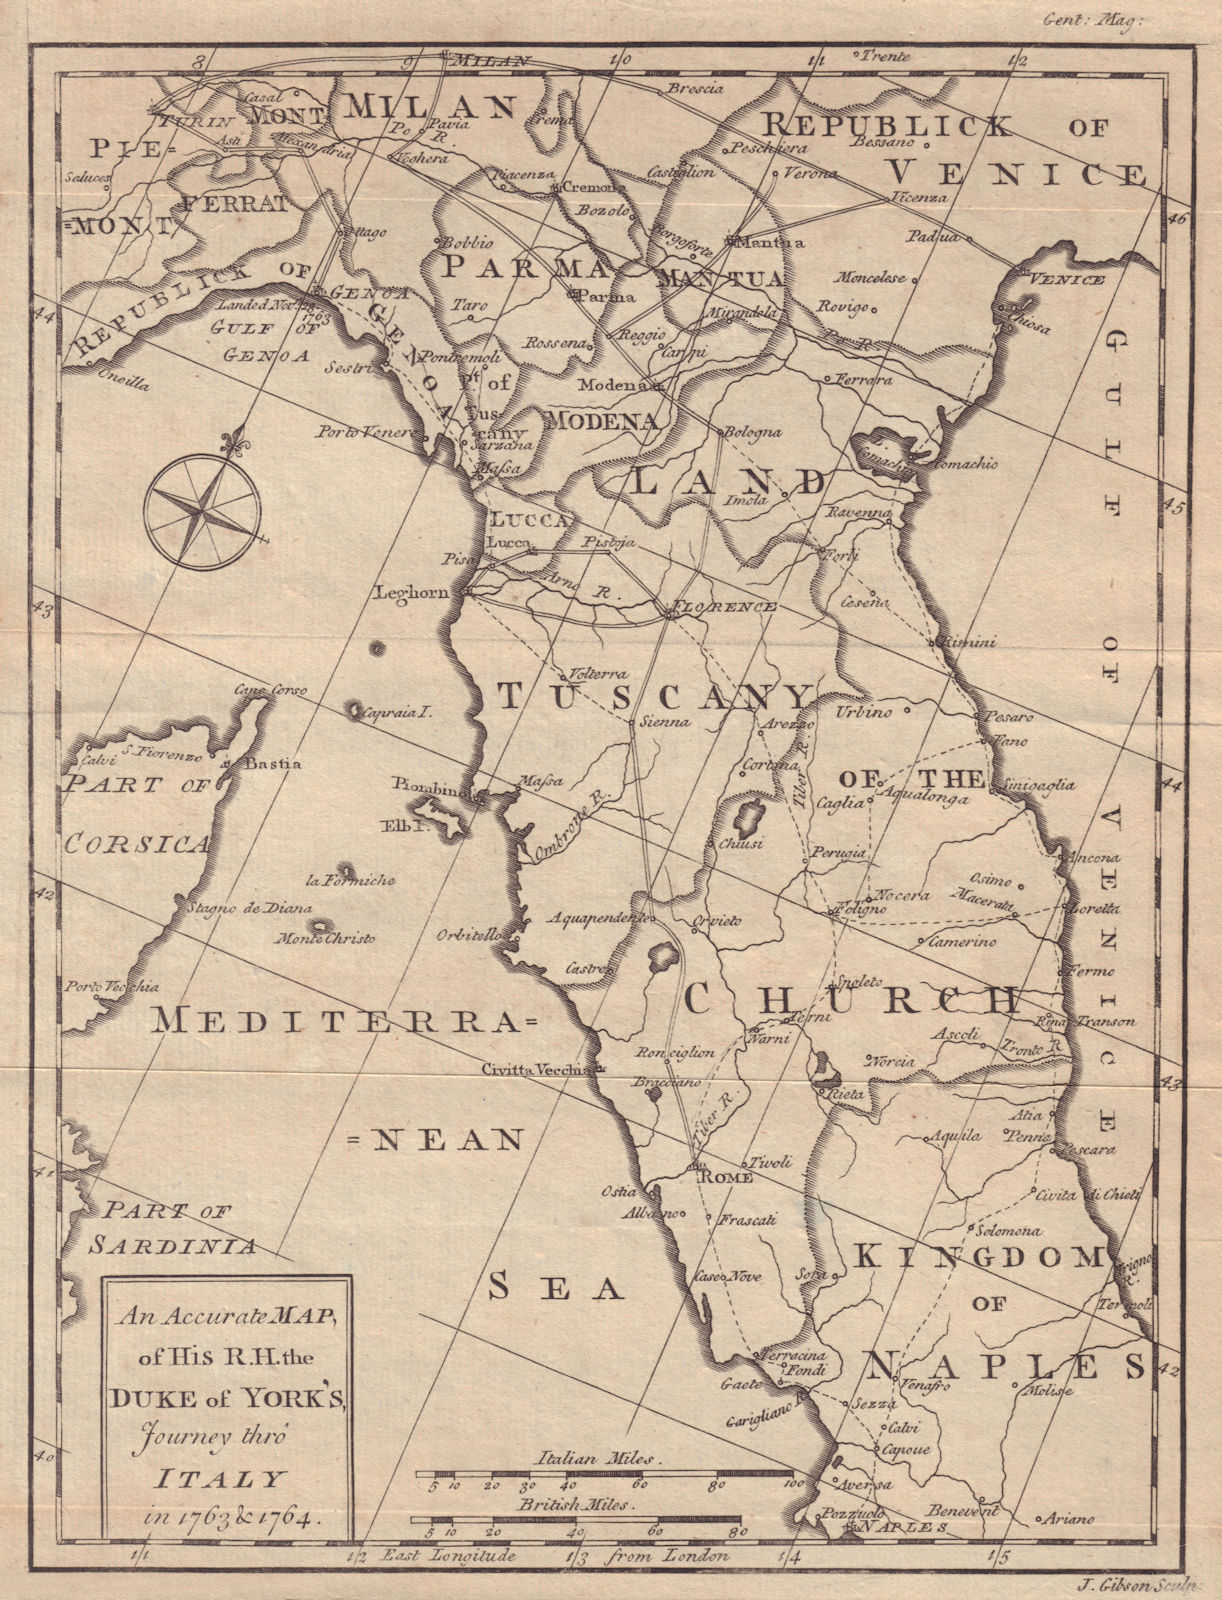 Associate Product An Accurate Map of His RH the Duke of York's journey thro Italy… GIBSON 1764